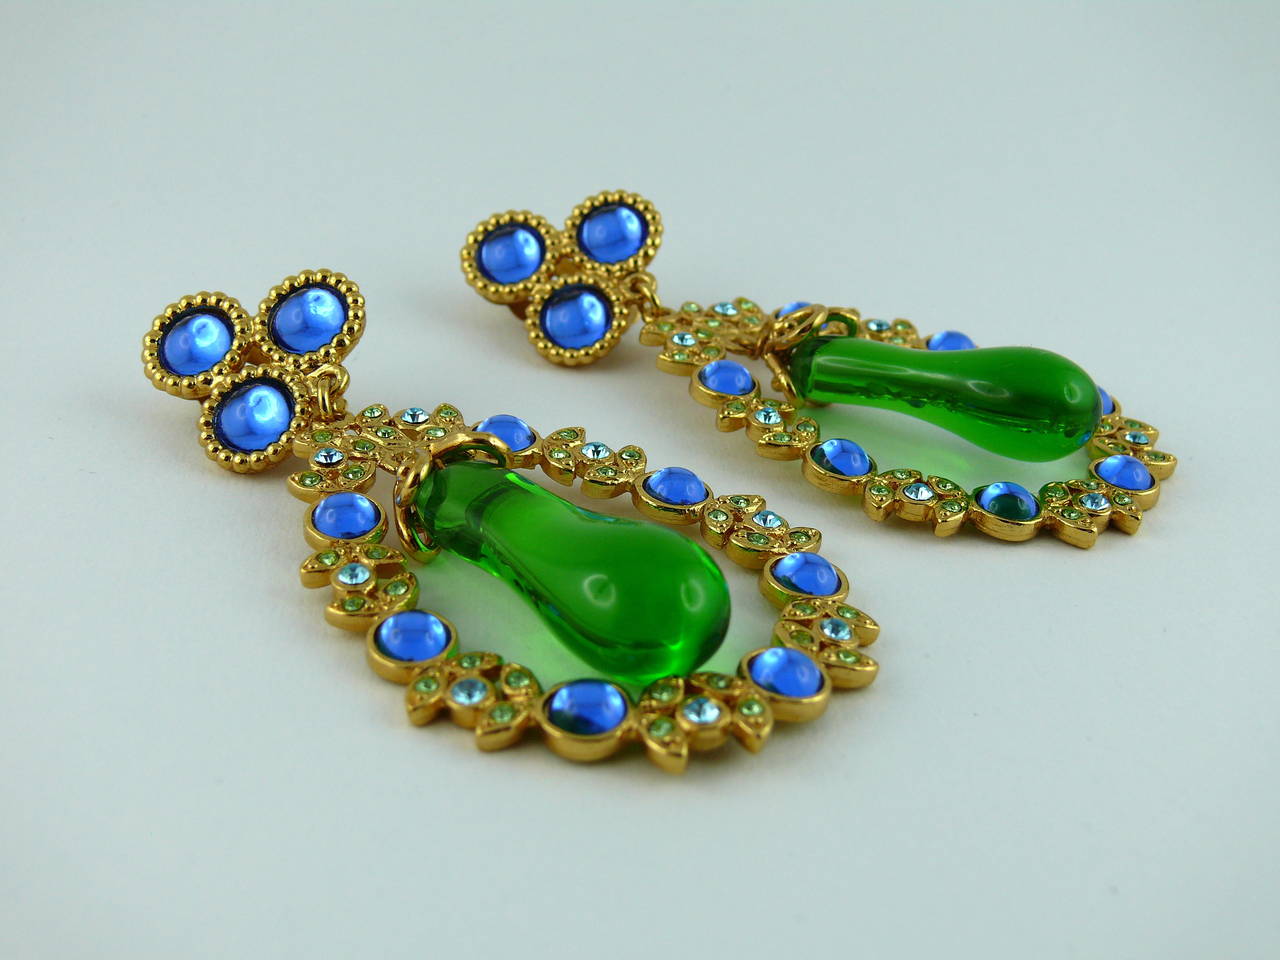 YVES SAINT LAURENT rare vintage crystal and poured glass dangling earrings (clip-on). Created in the ateliers of Robert Goossens.

Multi colored rhinestones and sapphire blue glass cabochons in a gold tone setting embellished with a massive green